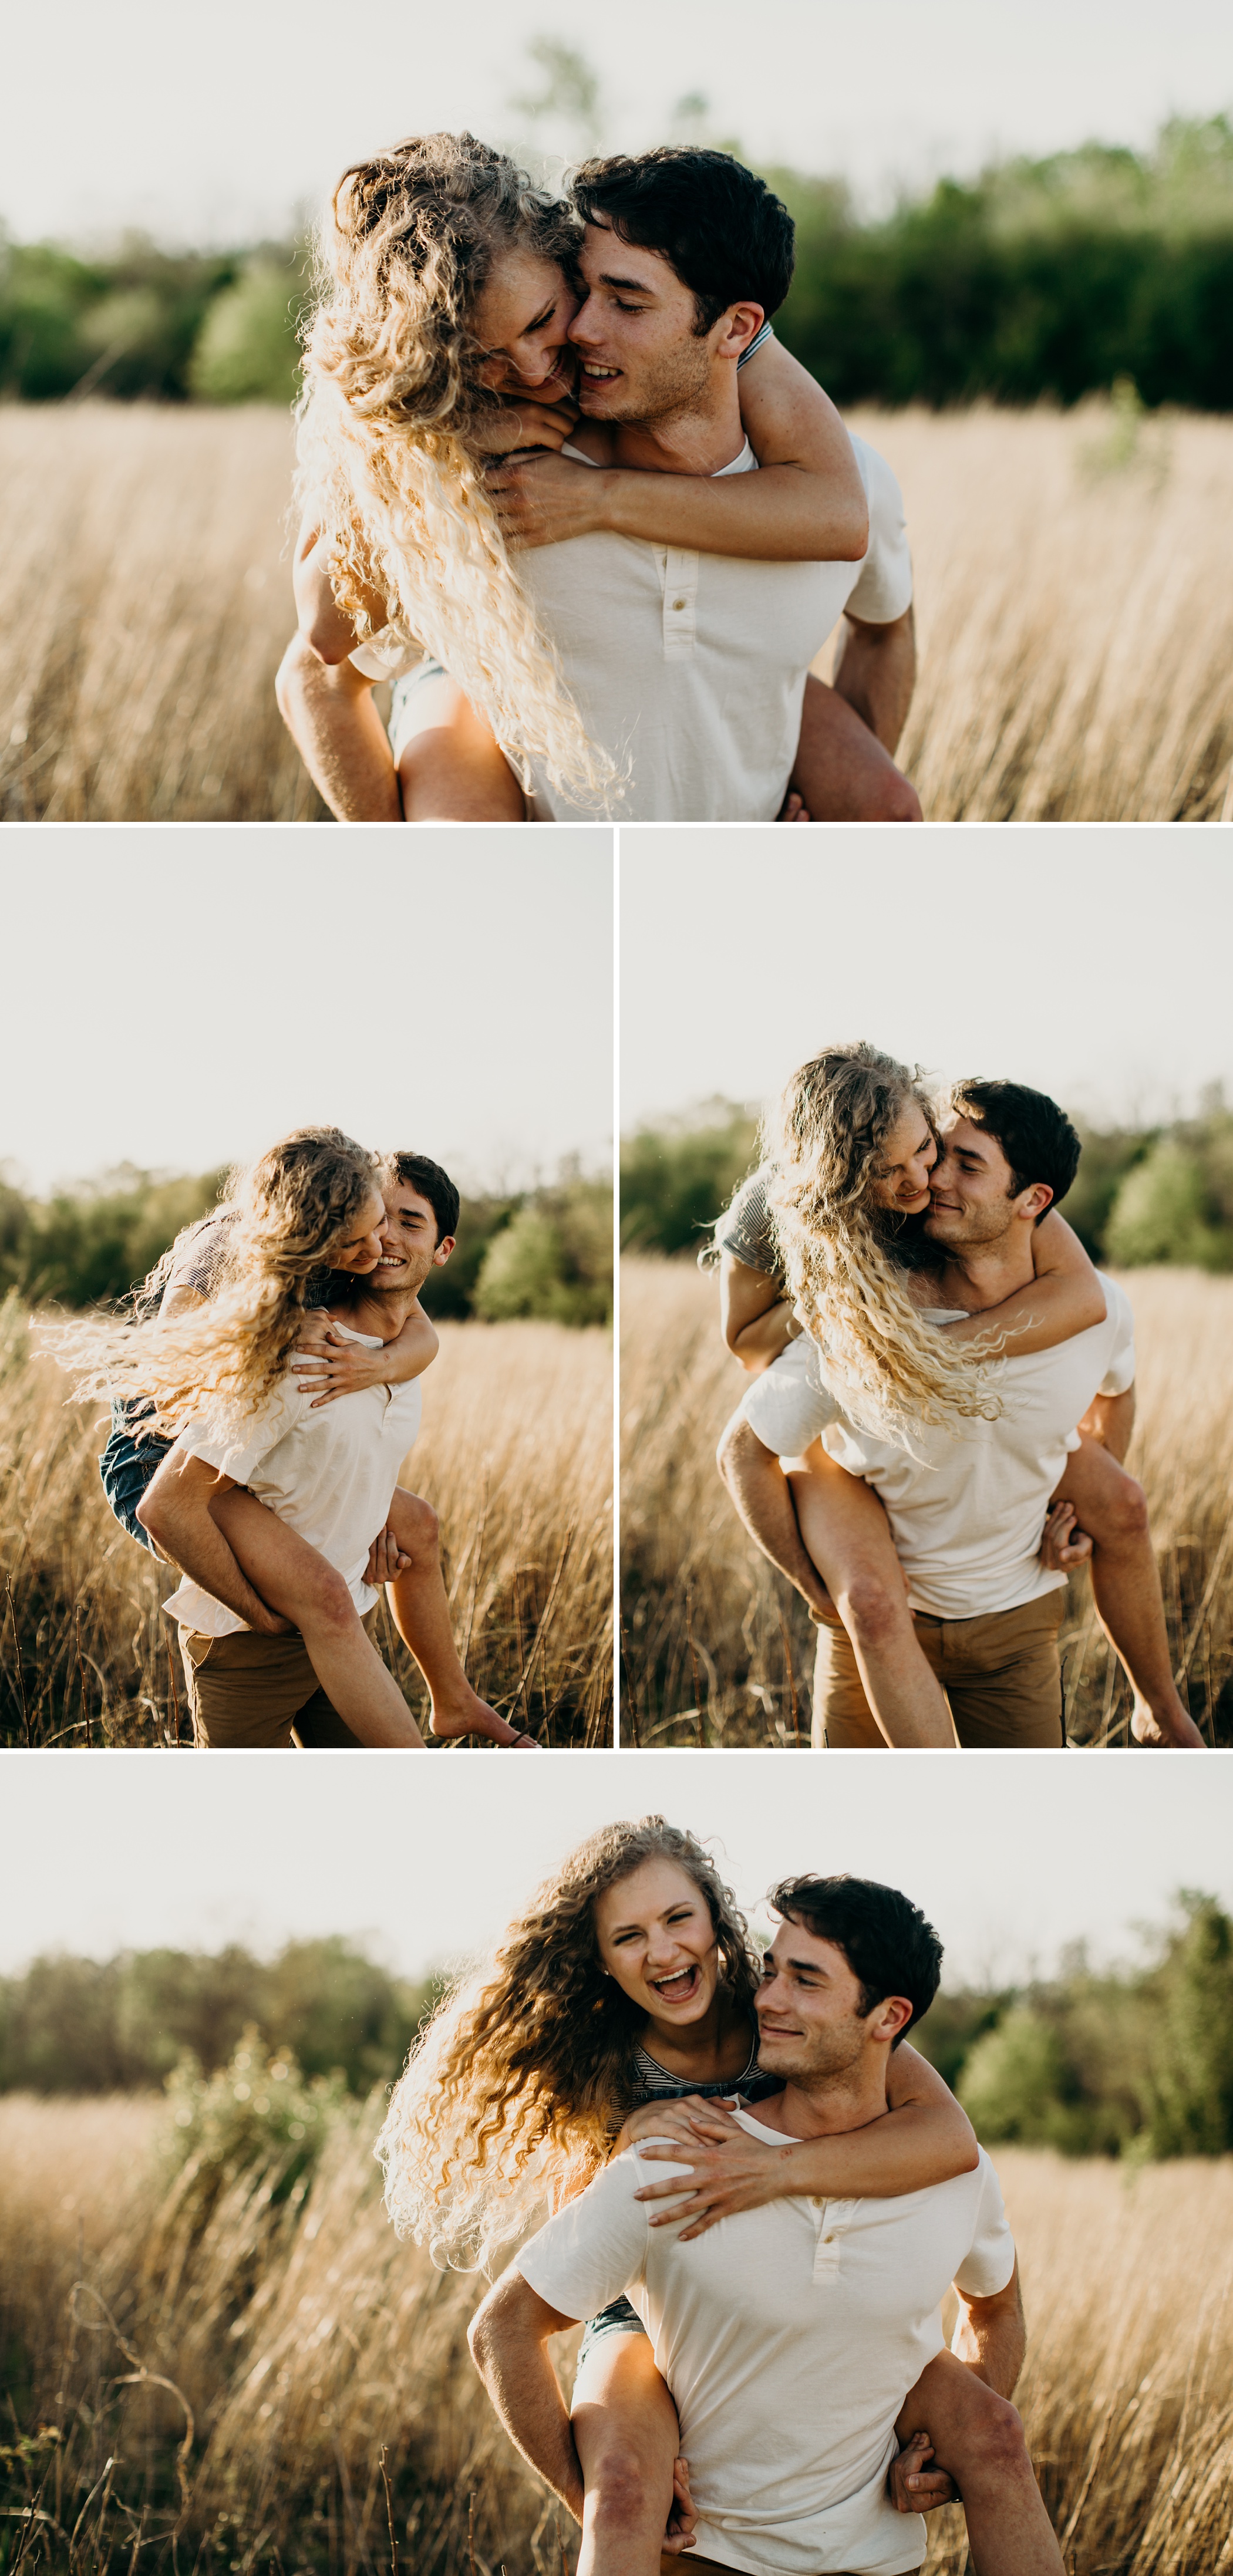 camping engagement session, colorado engagement session, the johnsons photo, intimate engagement session, adventurous engagement session, arkansas wedding photographer